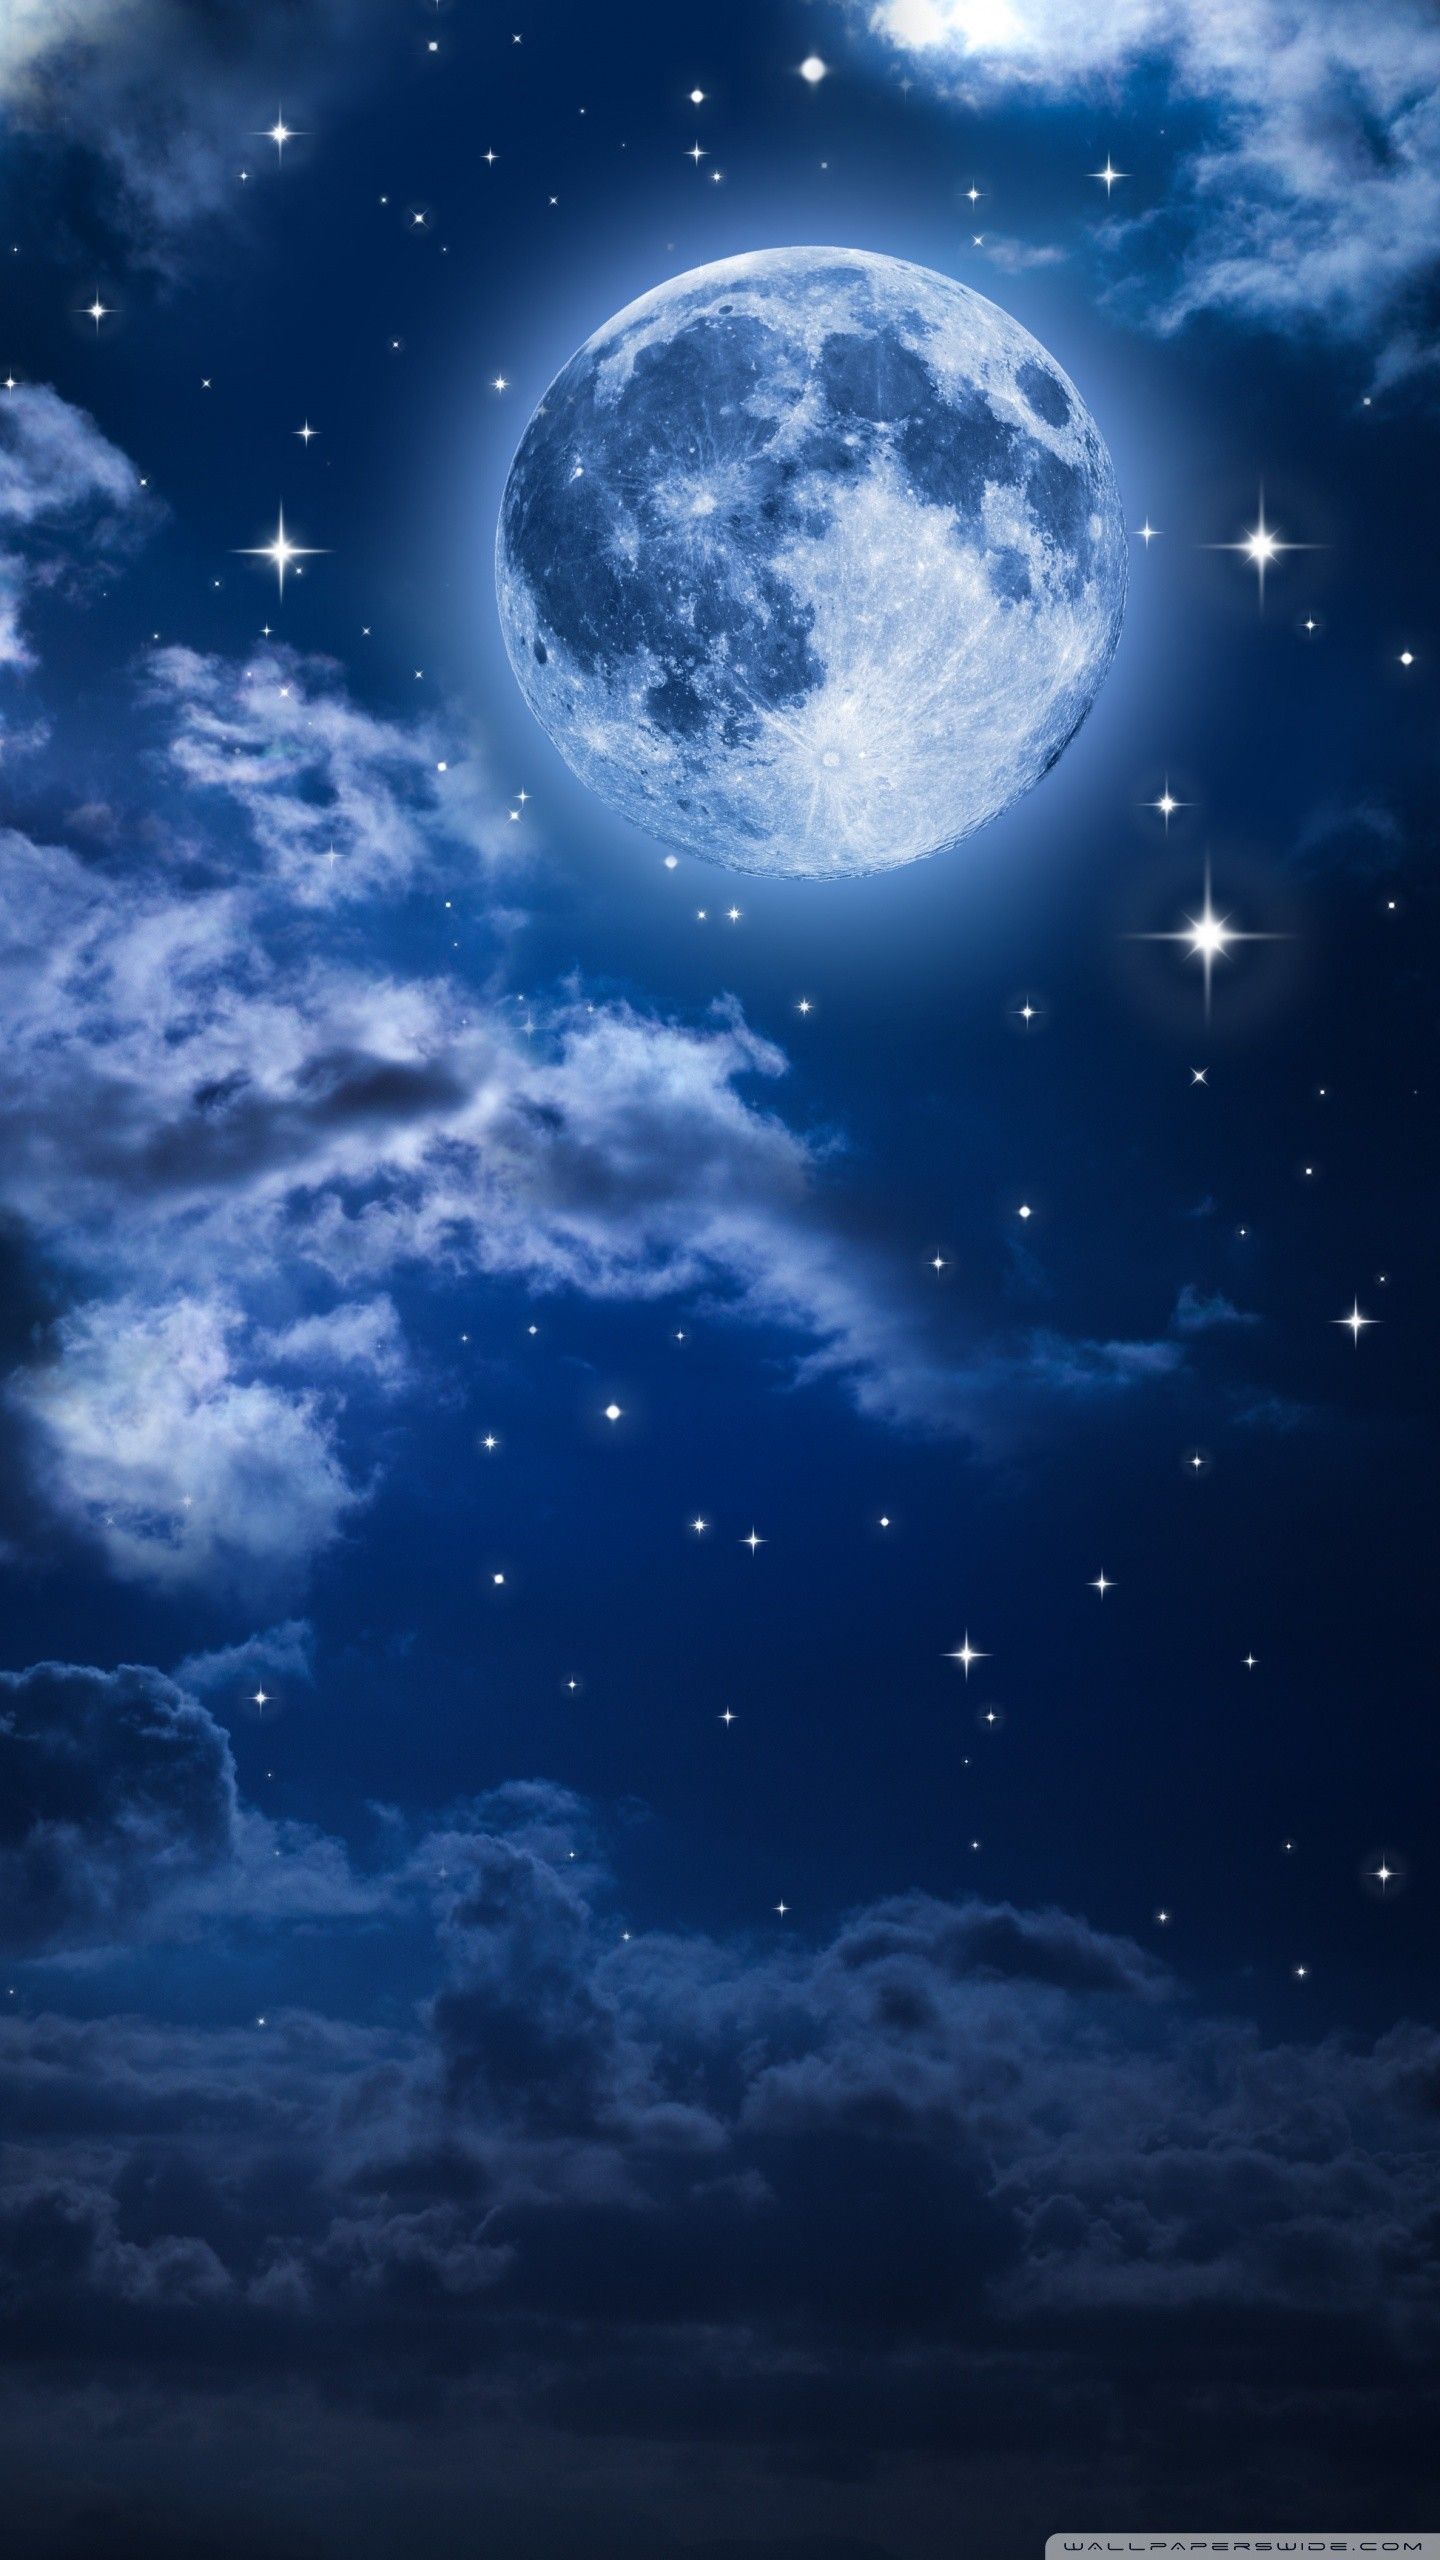 10 Dreamy moon wallpapers for iPhone in 2023  iGeeksBlog